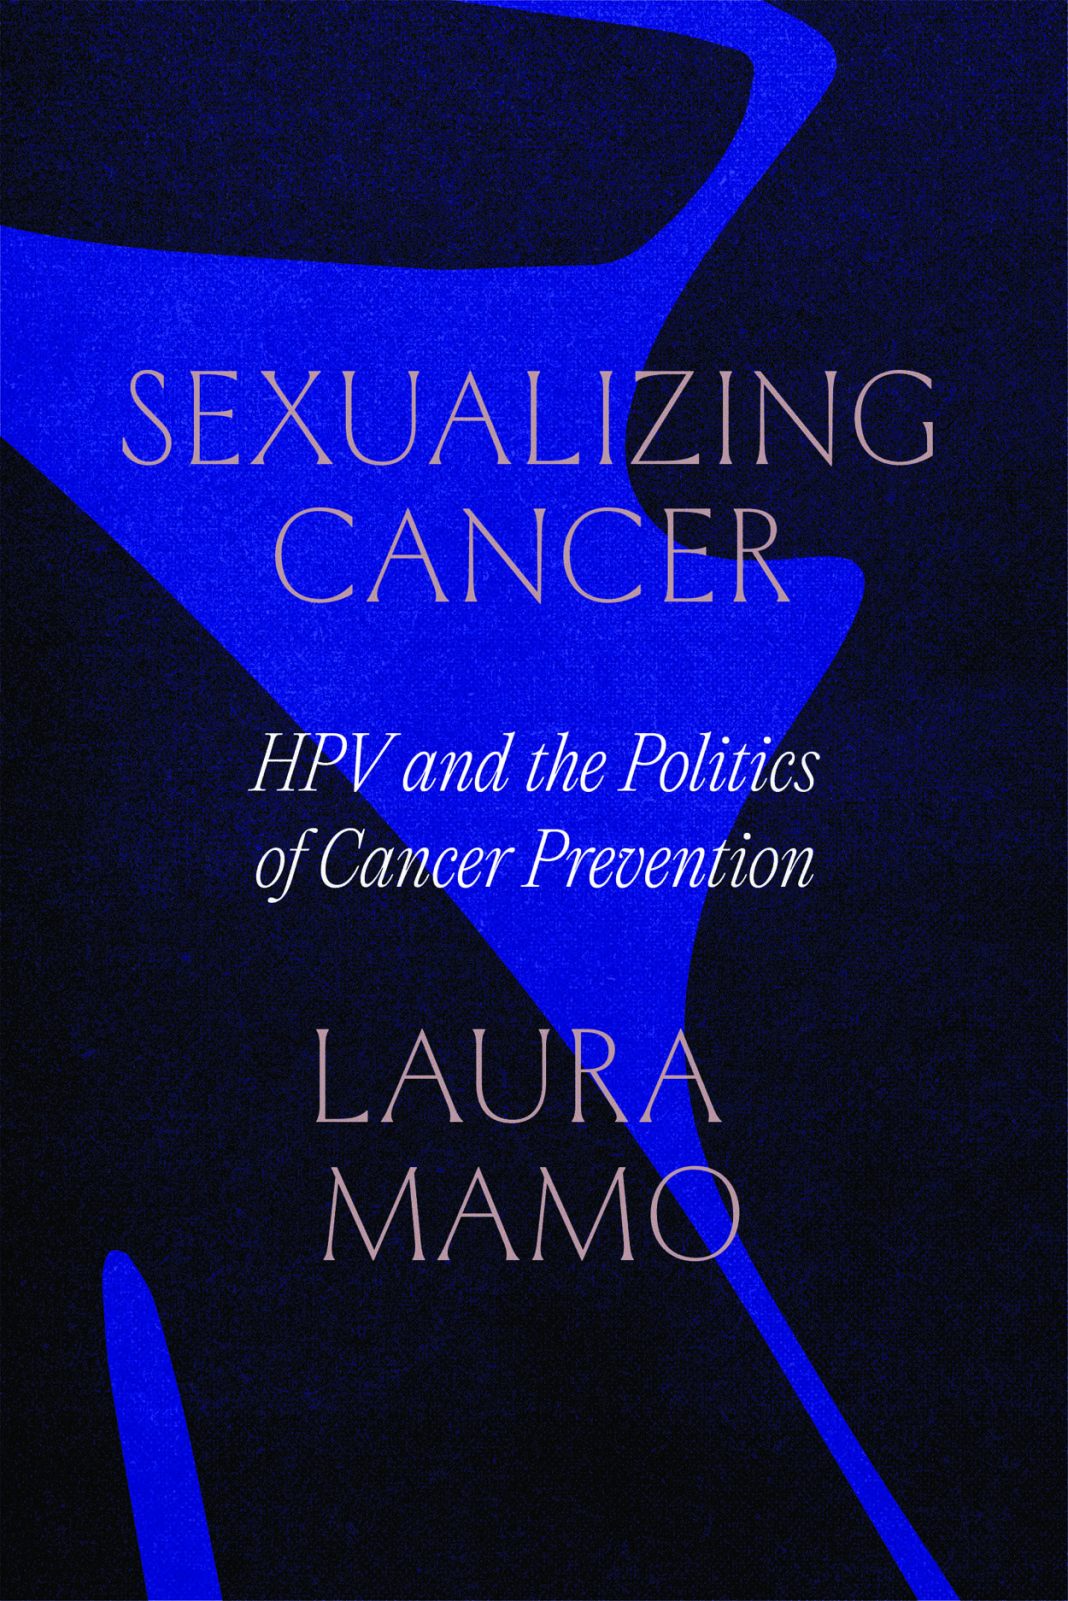 five-questions-with-laura-mamo,-author-of-“sexualizing-cancer”